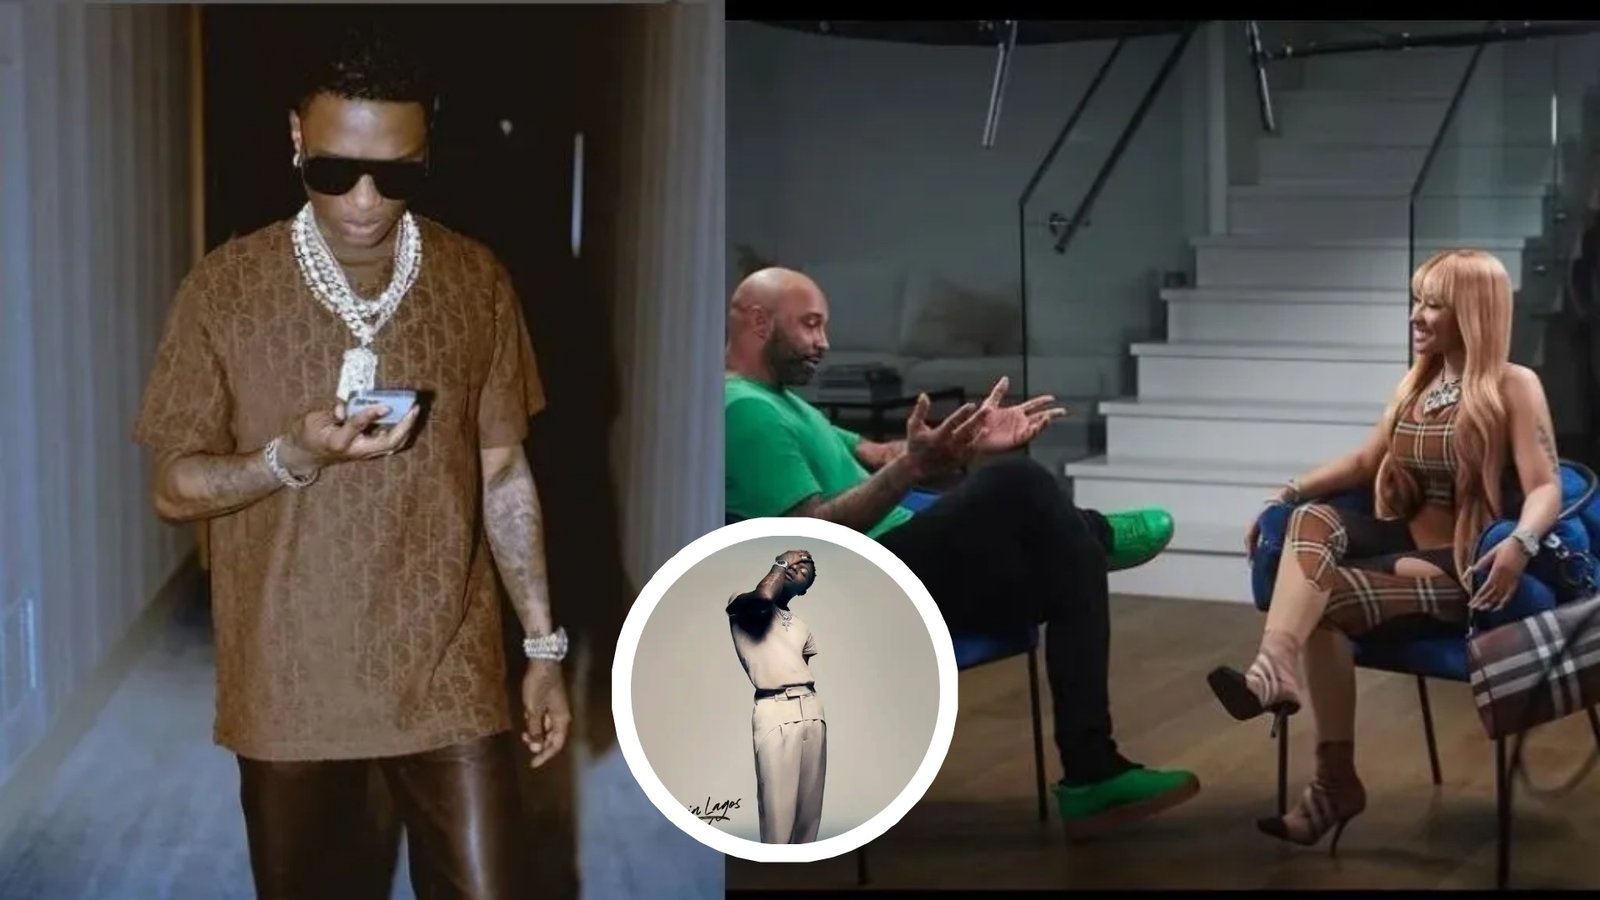 “Wizkid’s Essence song deserves to win song of the year at the Grammys” – Joe Budden and Nicki Minaj (Video)